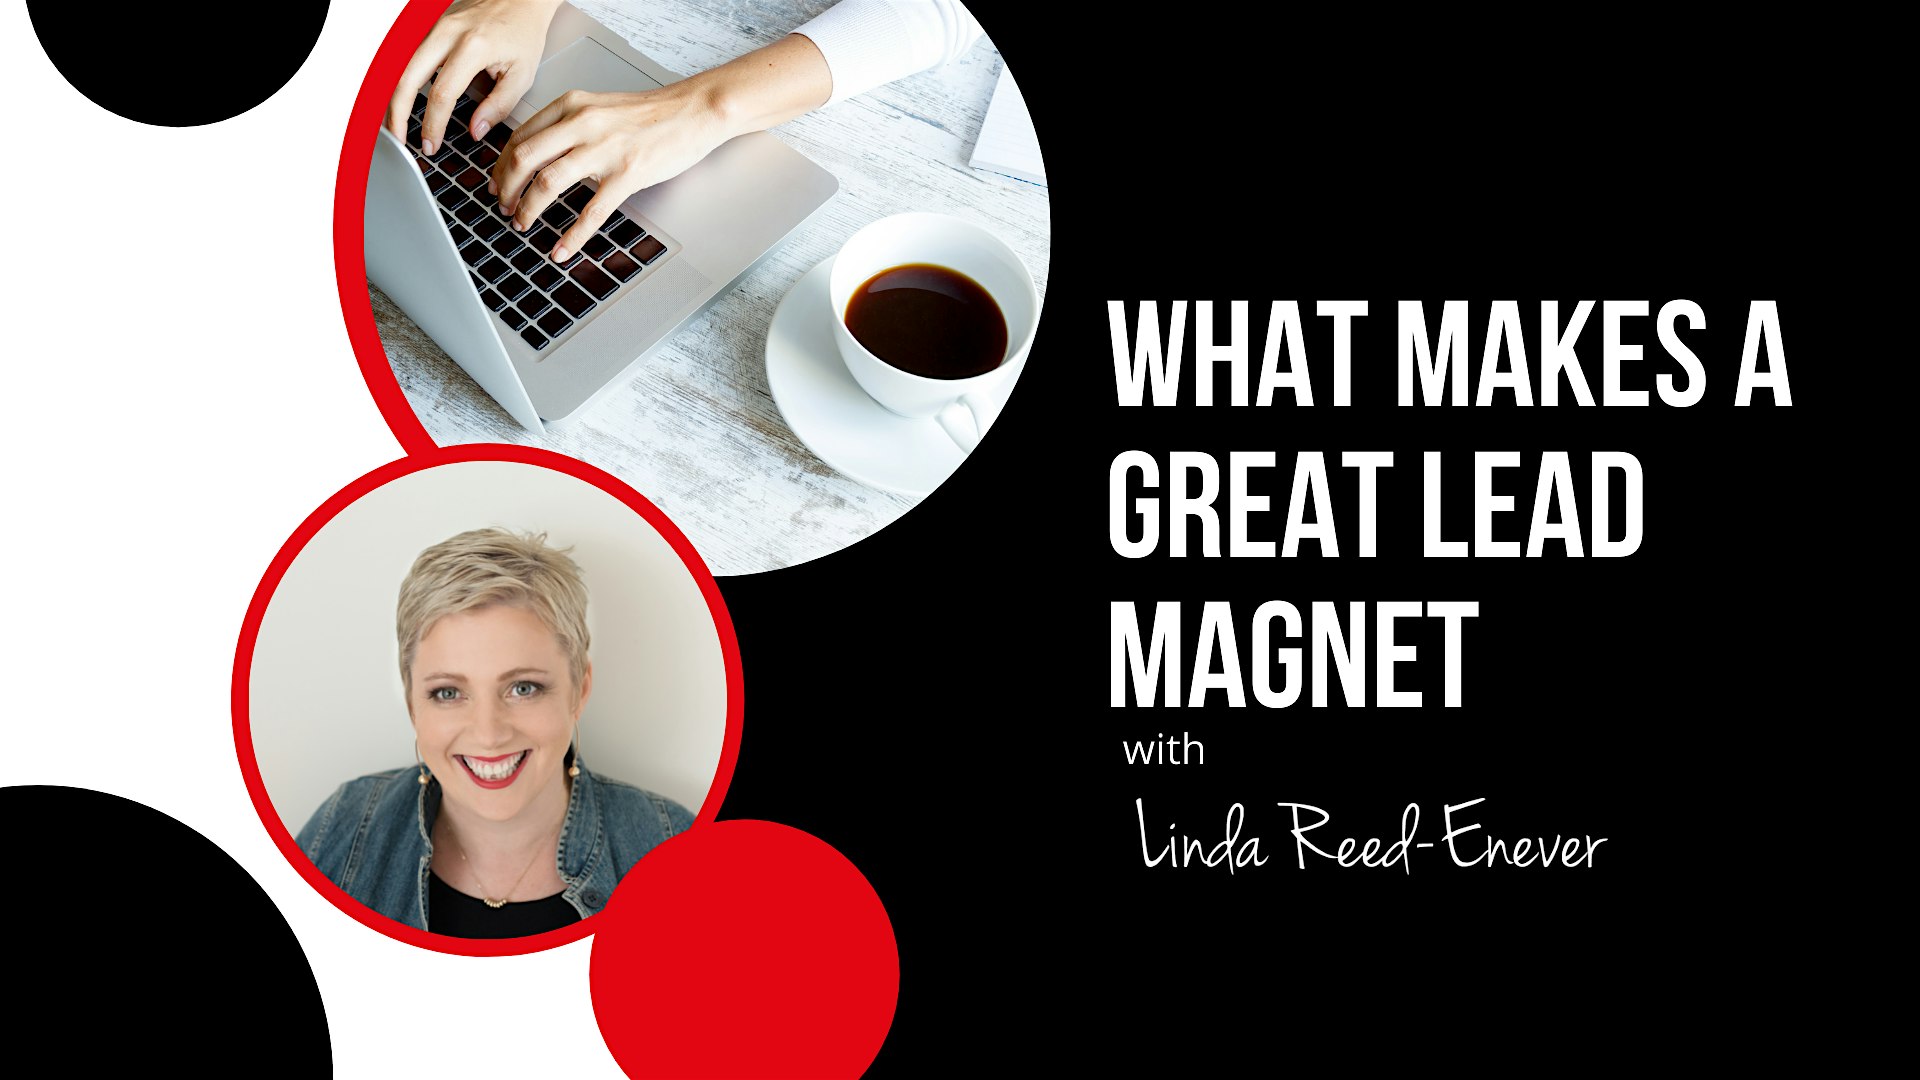 What Makes a Great Lead Magnet